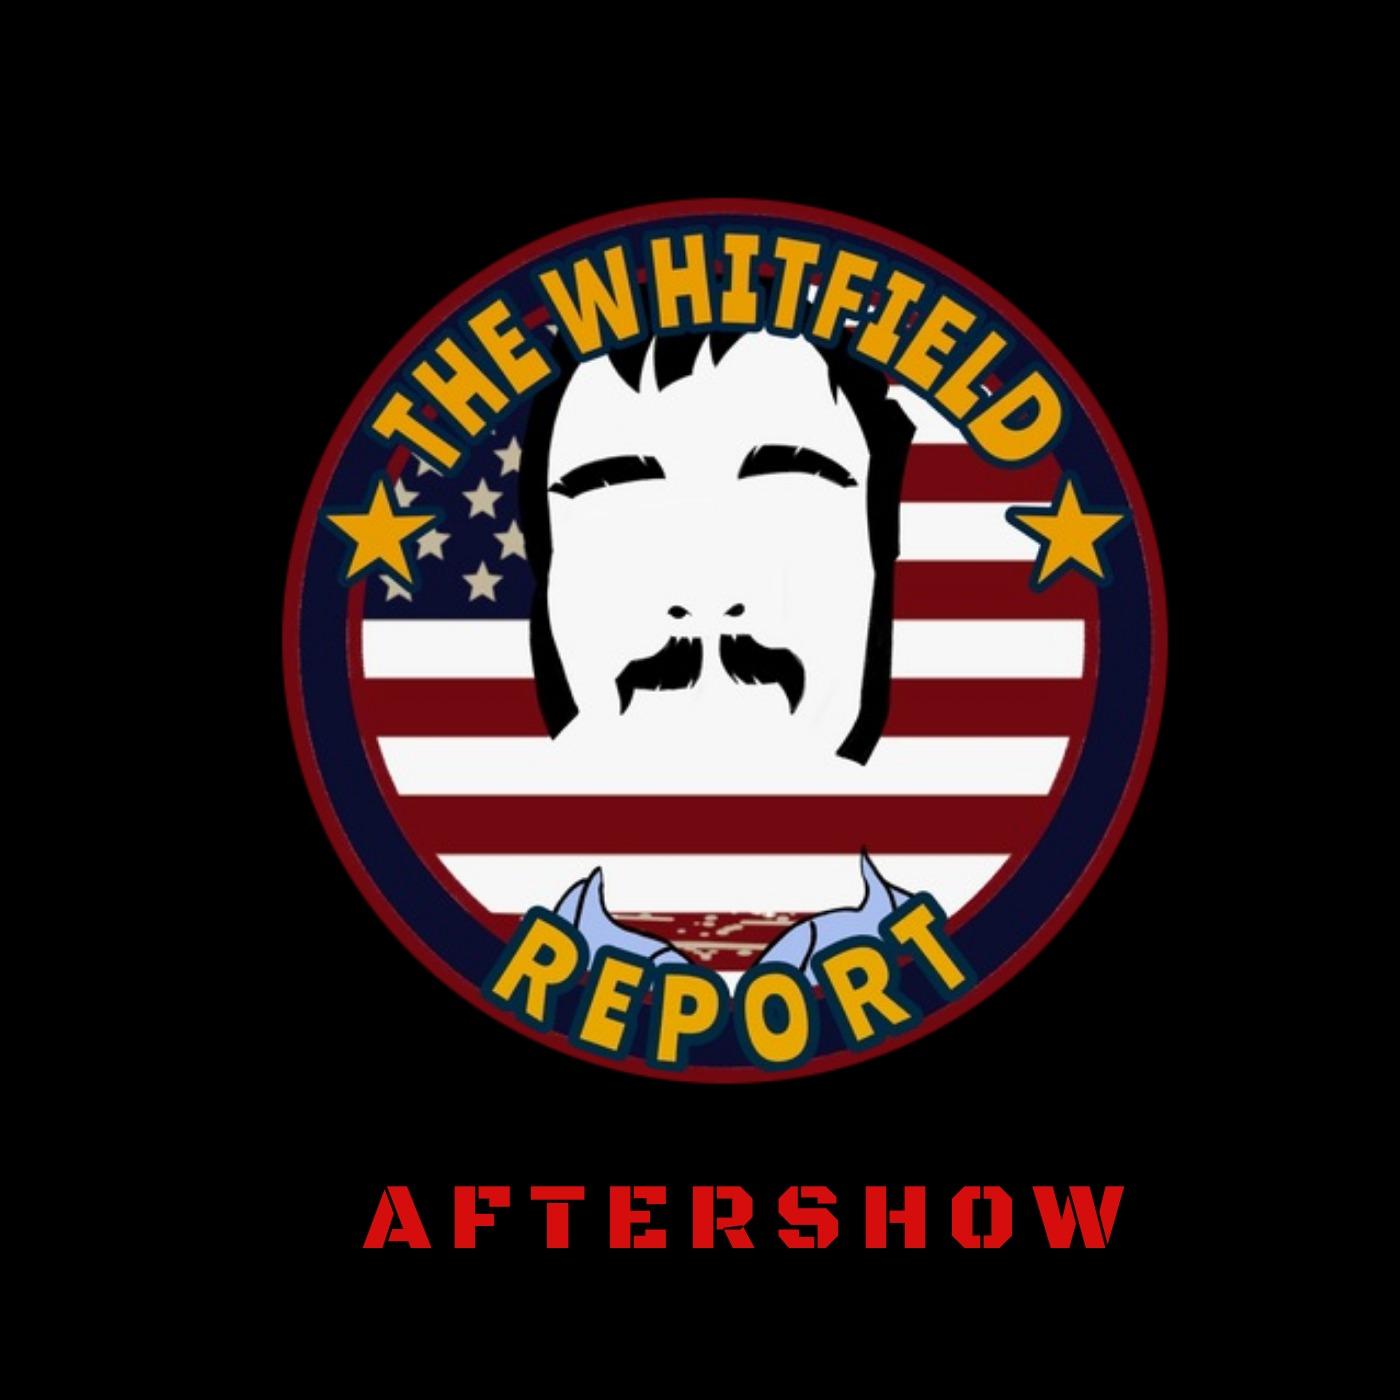 The Whitfield Report | After Show Podcast